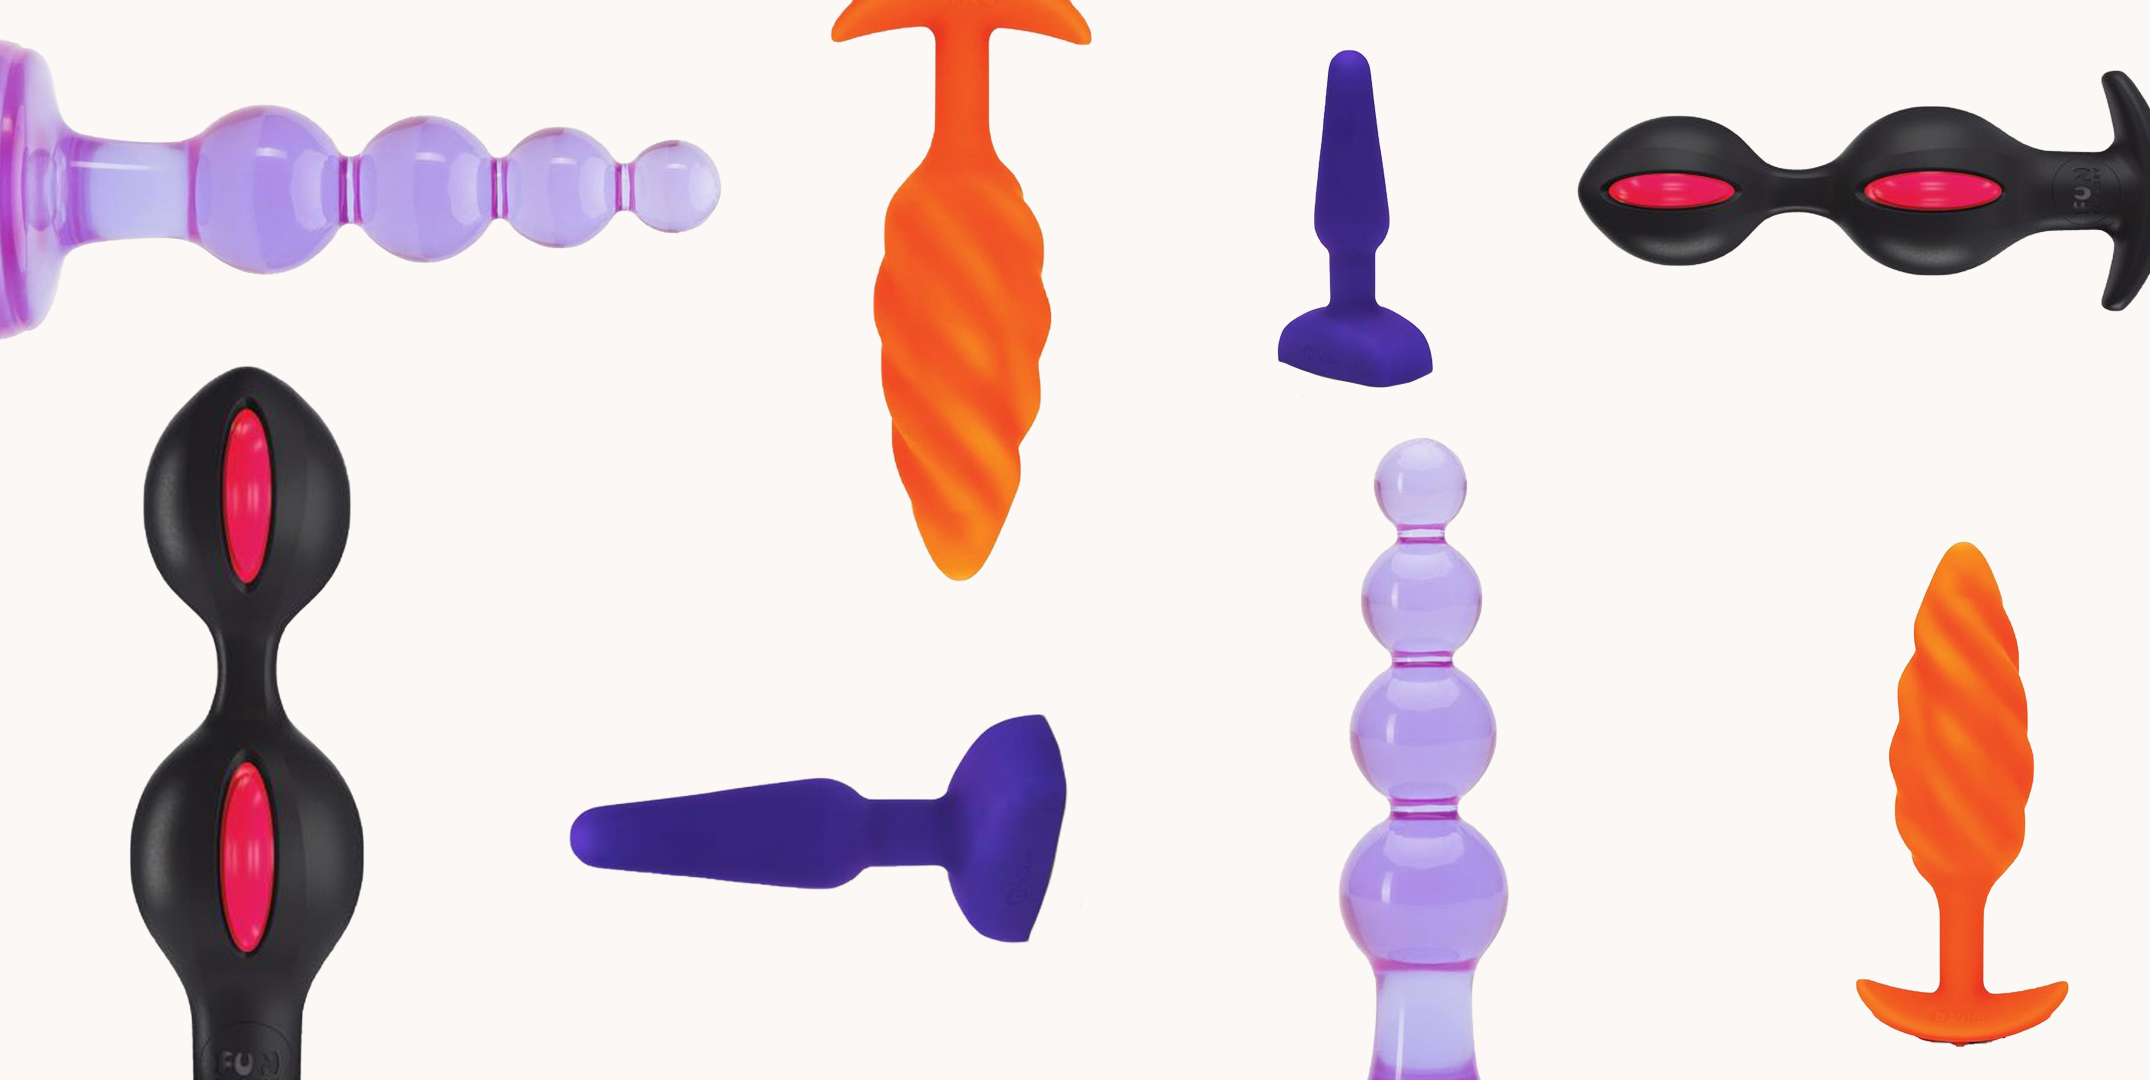 Some Anal With Sex Toys